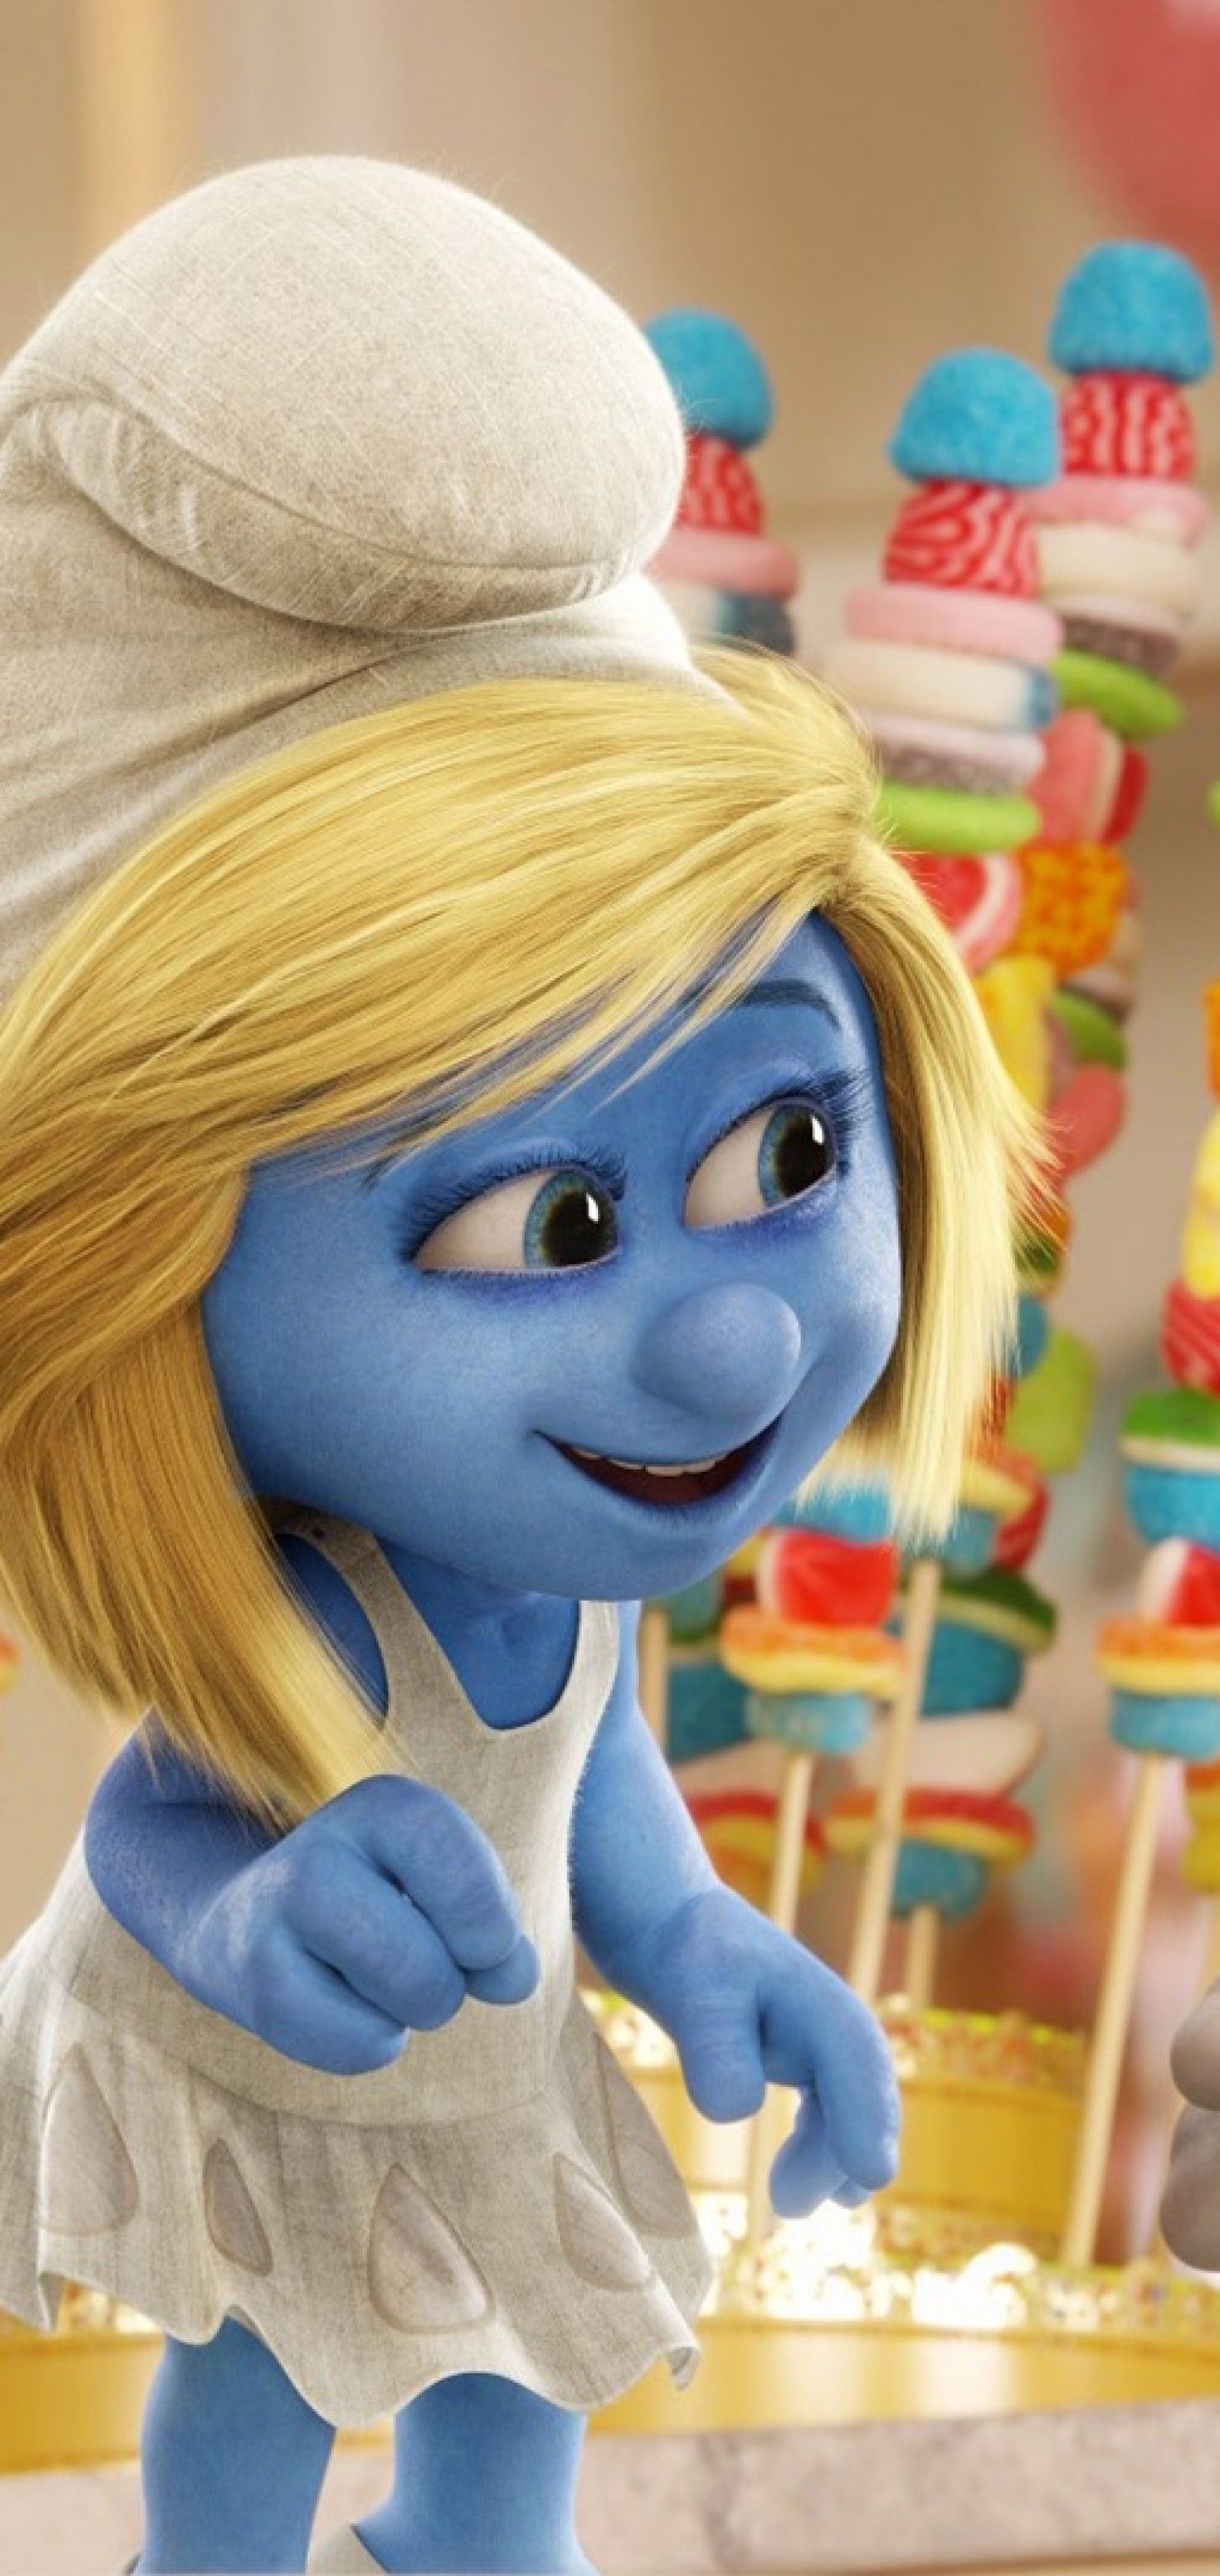 Download 1440x3040 The Smurfs Smurfette, Animation Wallpaper for Samsung Galaxy Note Plus & S10 Plus